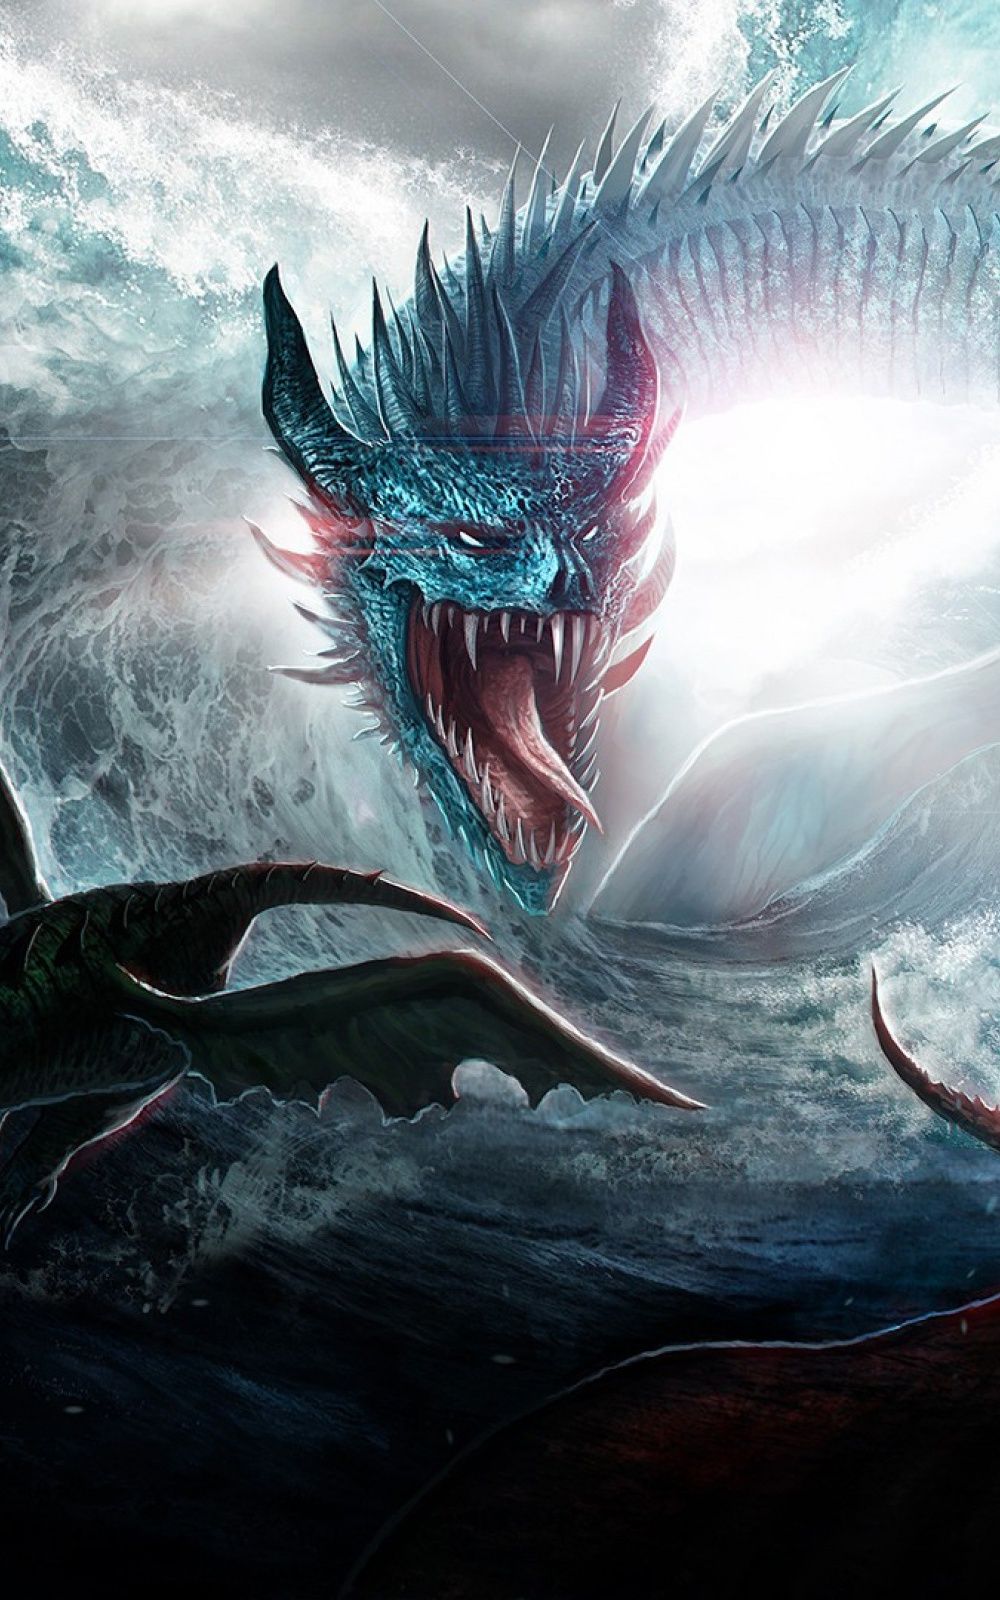 51+ Black Dragon Wallpapers: HD, 4K, 5K for PC and Mobile | Download free  images for iPhone, Android